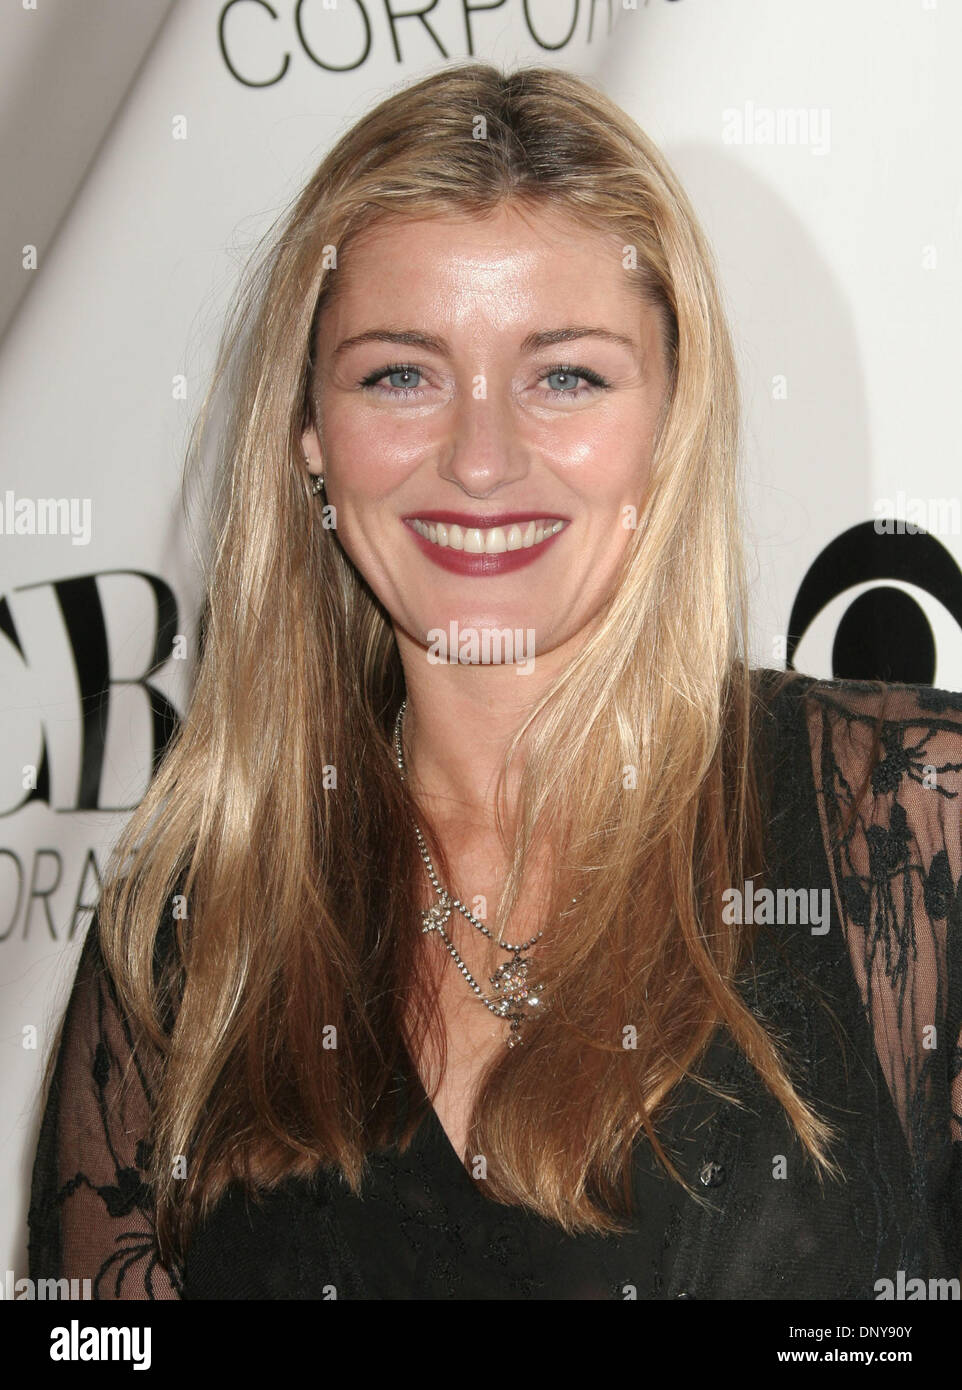 Jan 18, 2006; Los Angeles, CA, USA;  Actress LOUISE  LOMBARD at the CBS UPN SHOWTIME TCA Party held at the Wind Tunnel at the Pasadena Arts College. Mandatory Credit: Photo by Paul Fenton/KPA/ZUMA Press. (©) Copyright 2006 by Paul Fenton Stock Photo